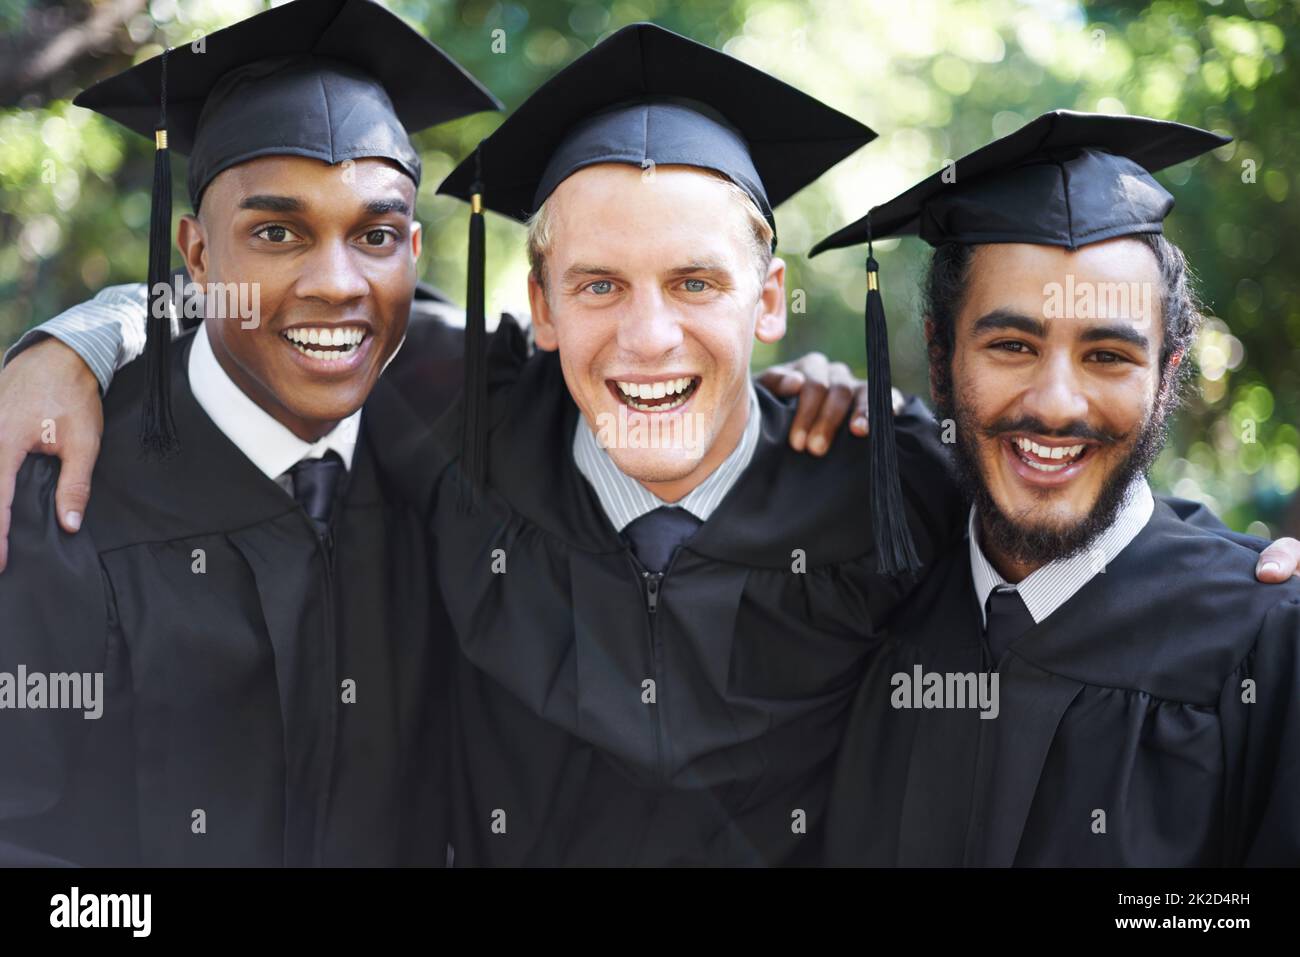 Its been tough, but weve finally made it. A group of happy male students on graduation day. Stock Photo